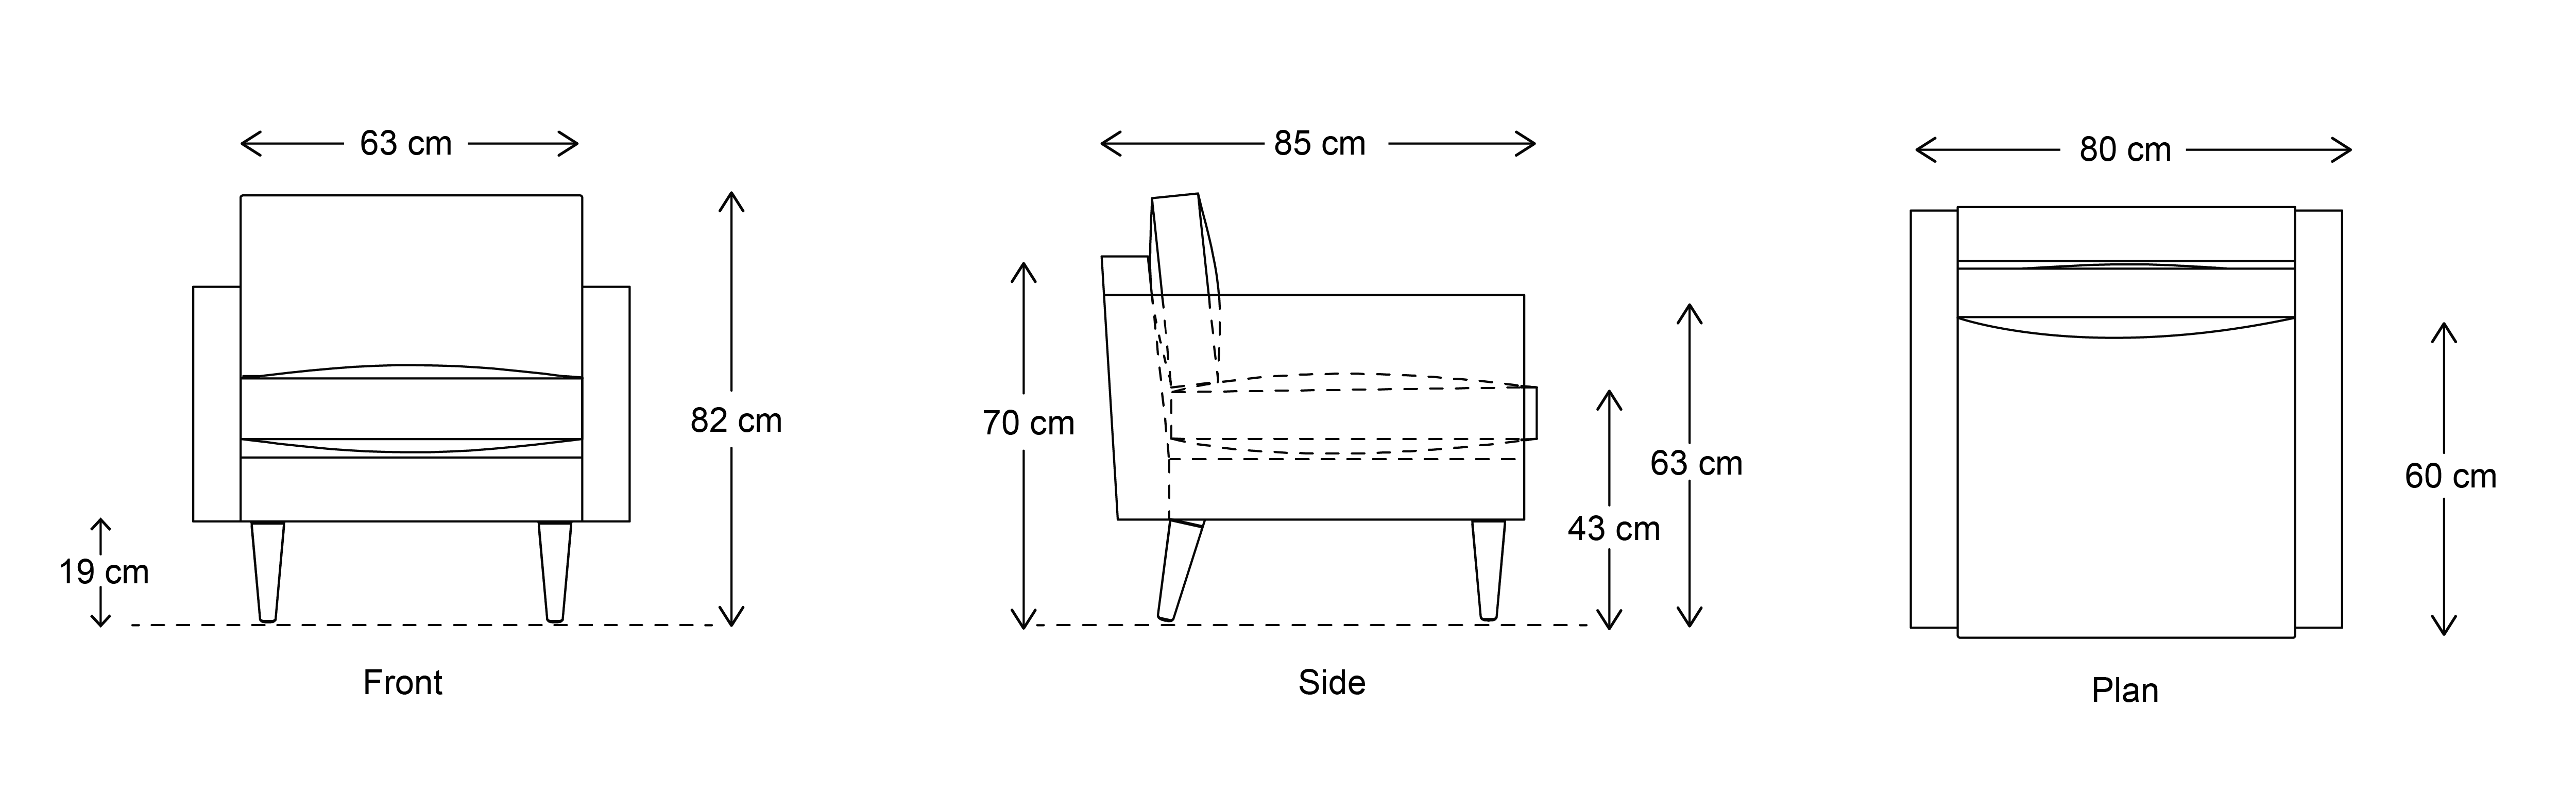 Model 01 Armchair dimensions drawing